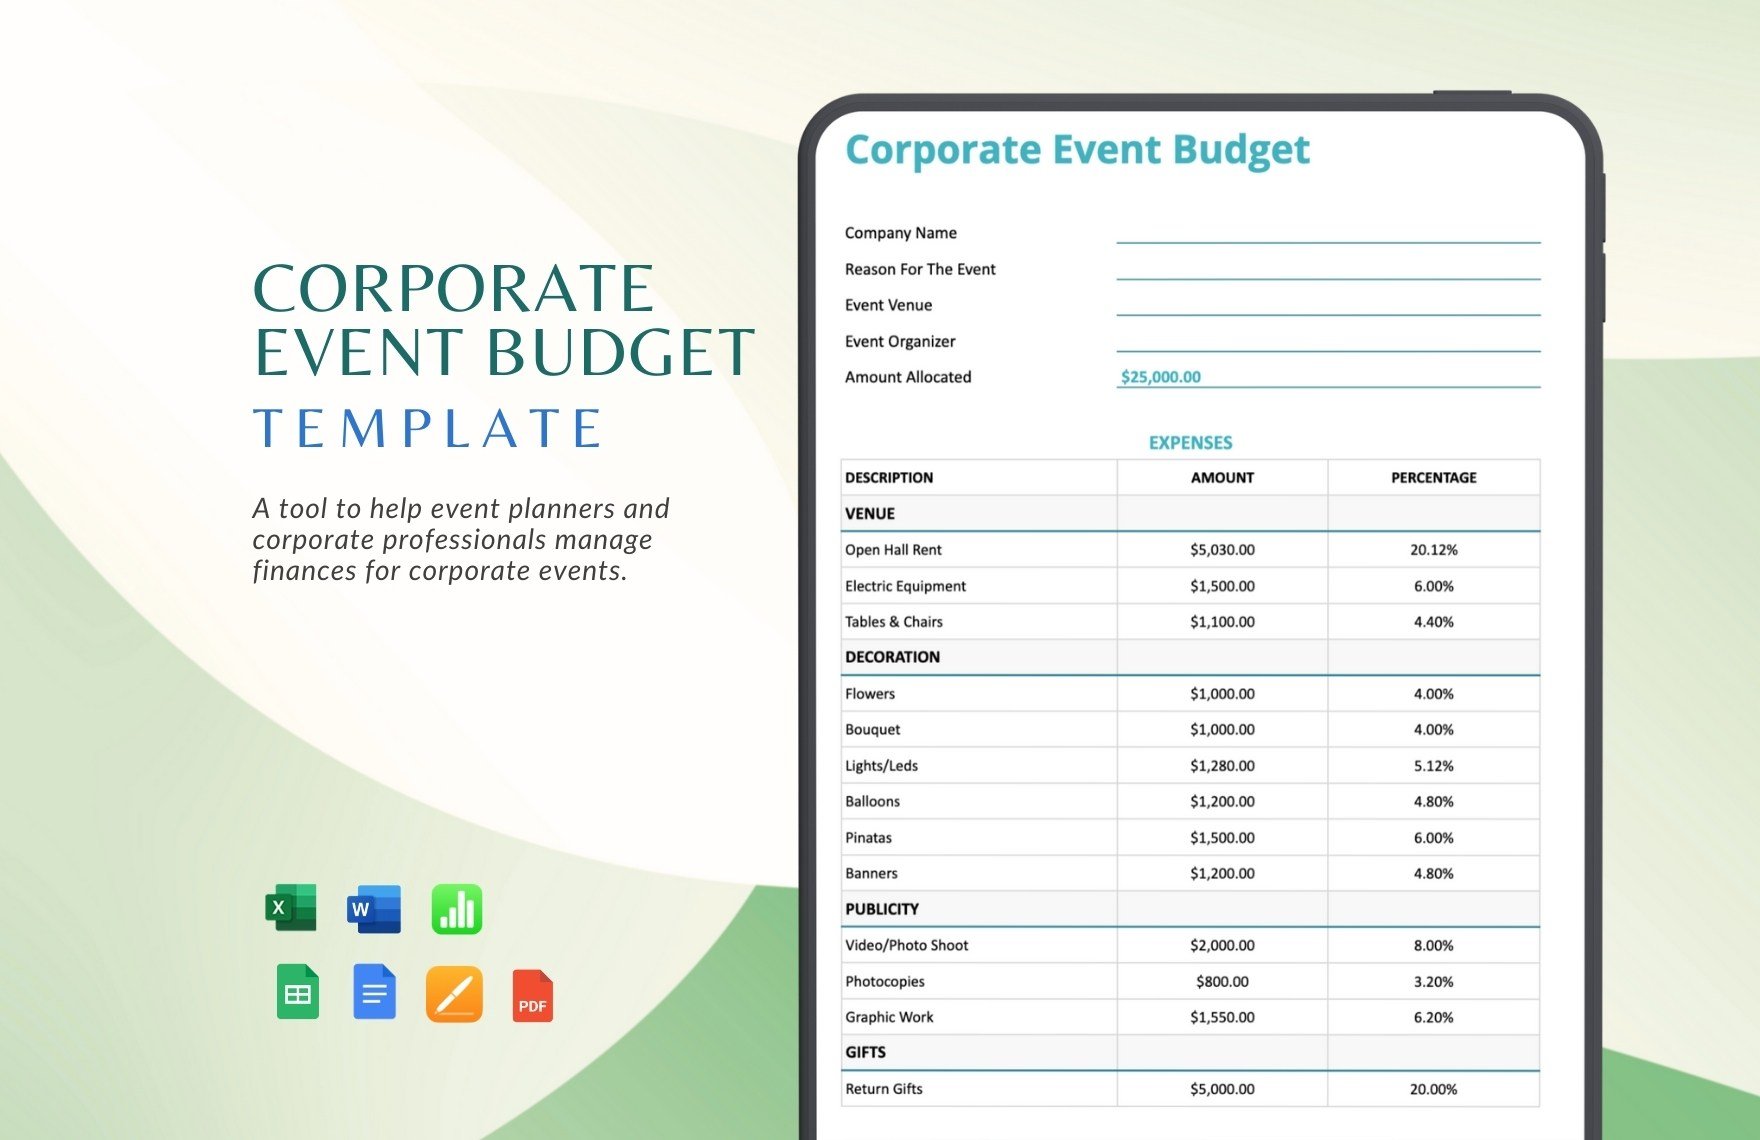 Corporate Event Budget Template in Word, Google Docs, Excel, PDF, Google Sheets, Apple Pages, Apple Numbers